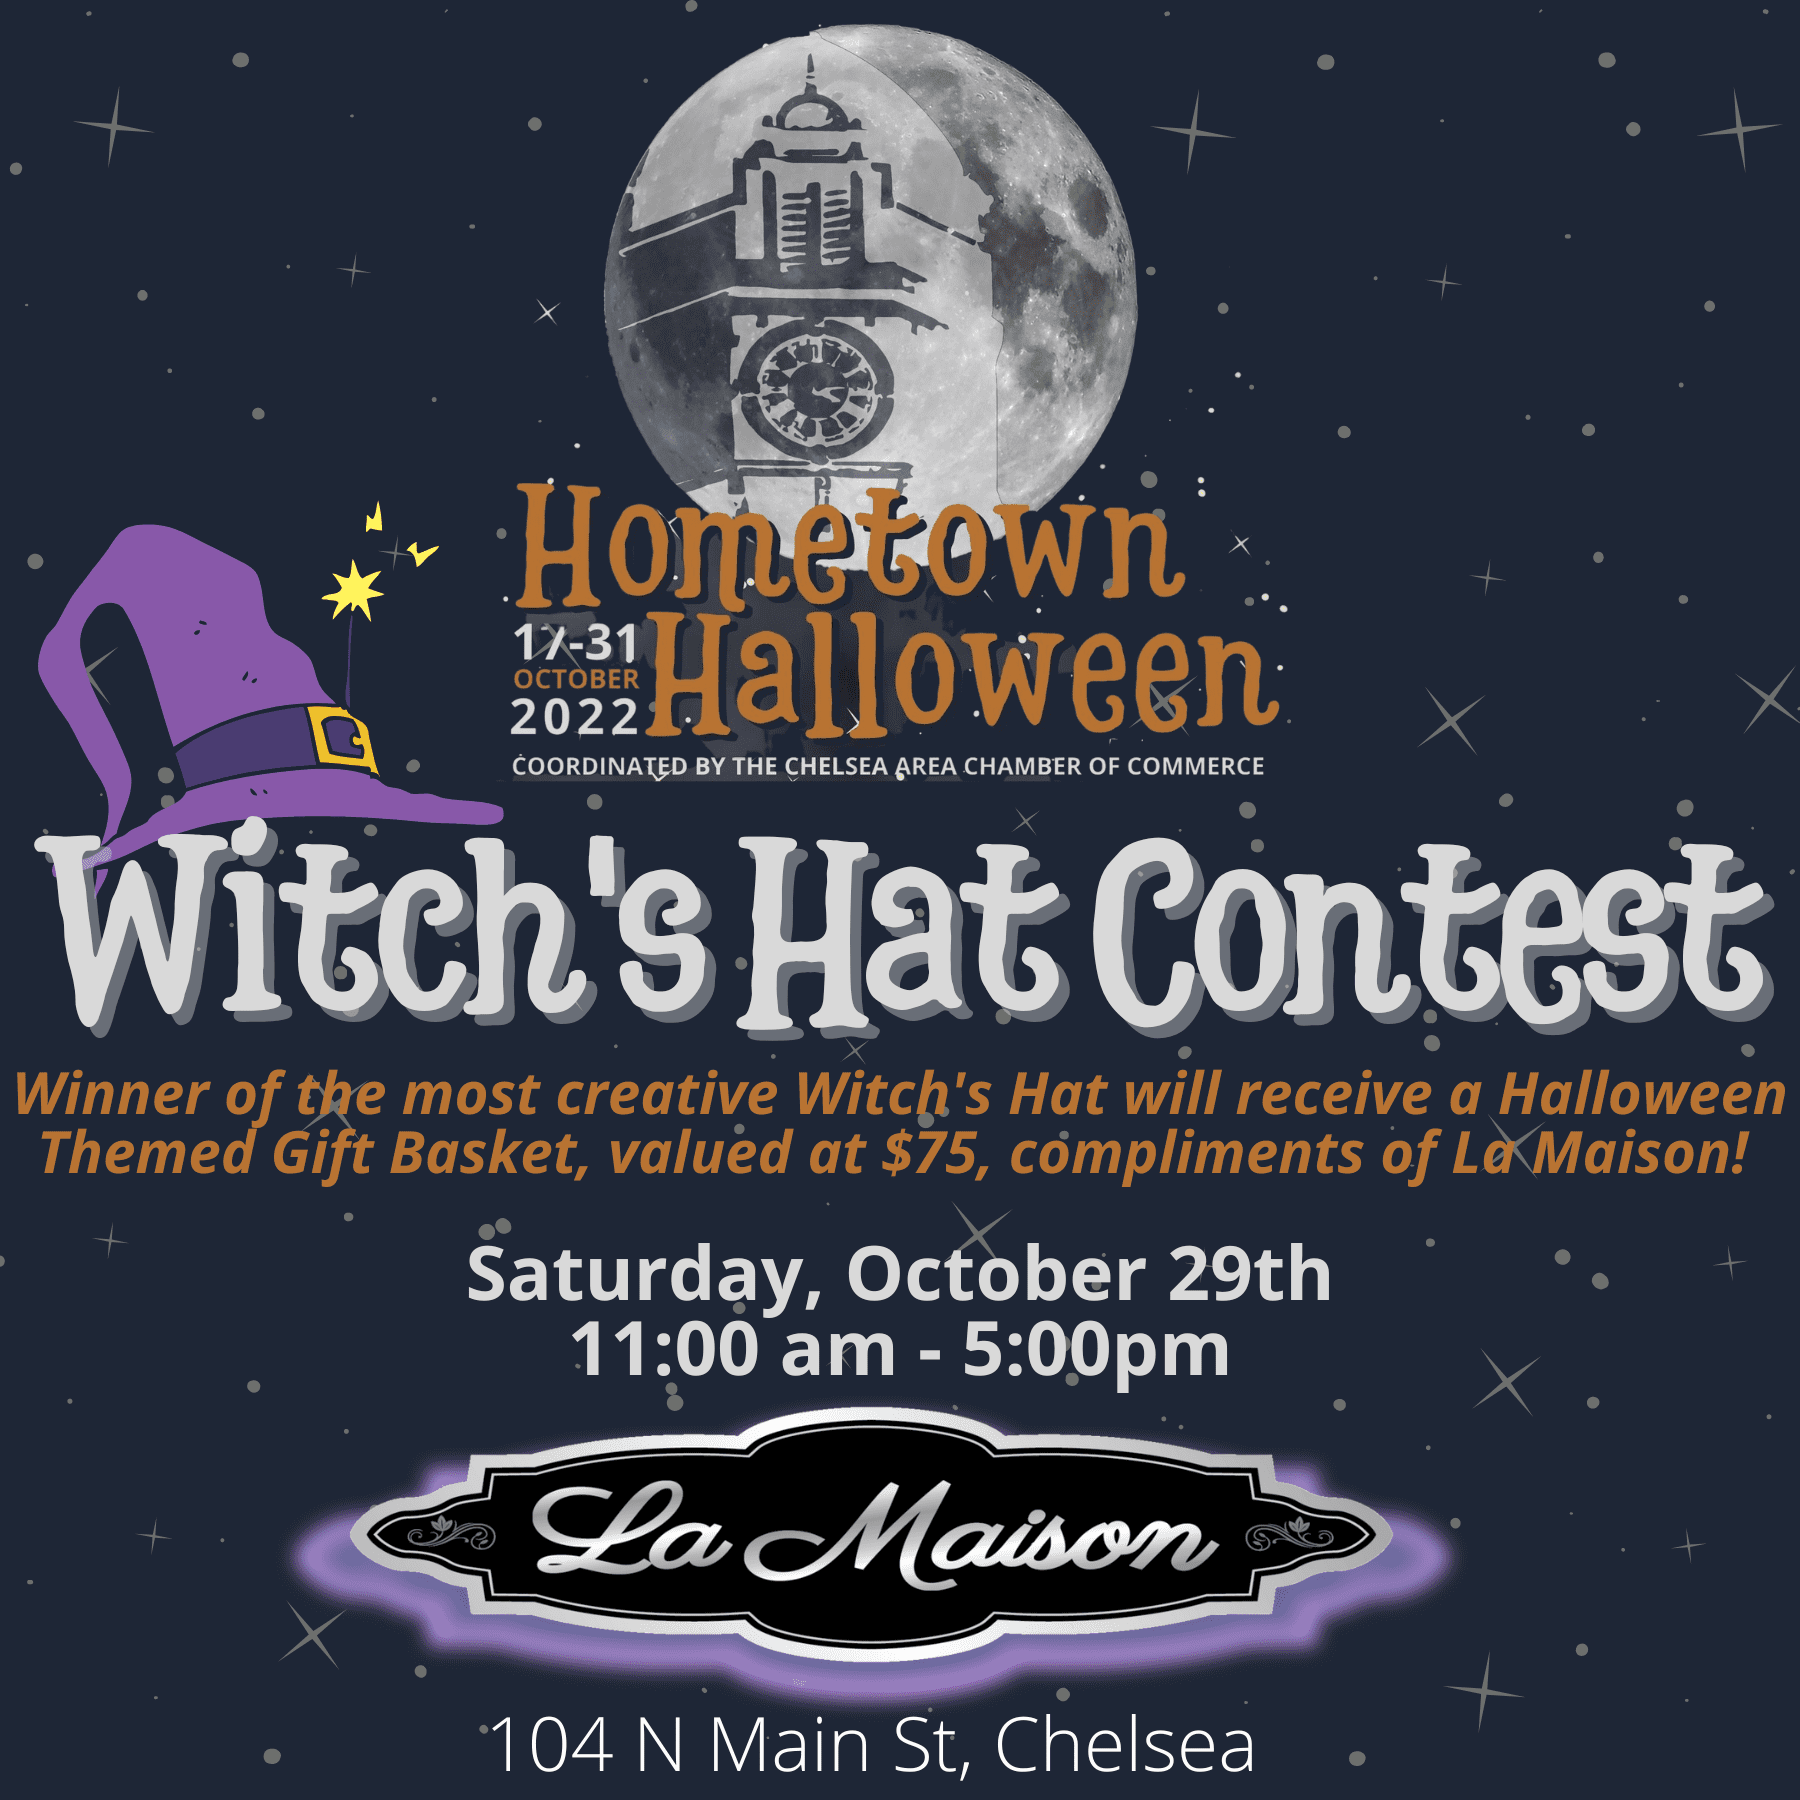 Witches Hat Contest